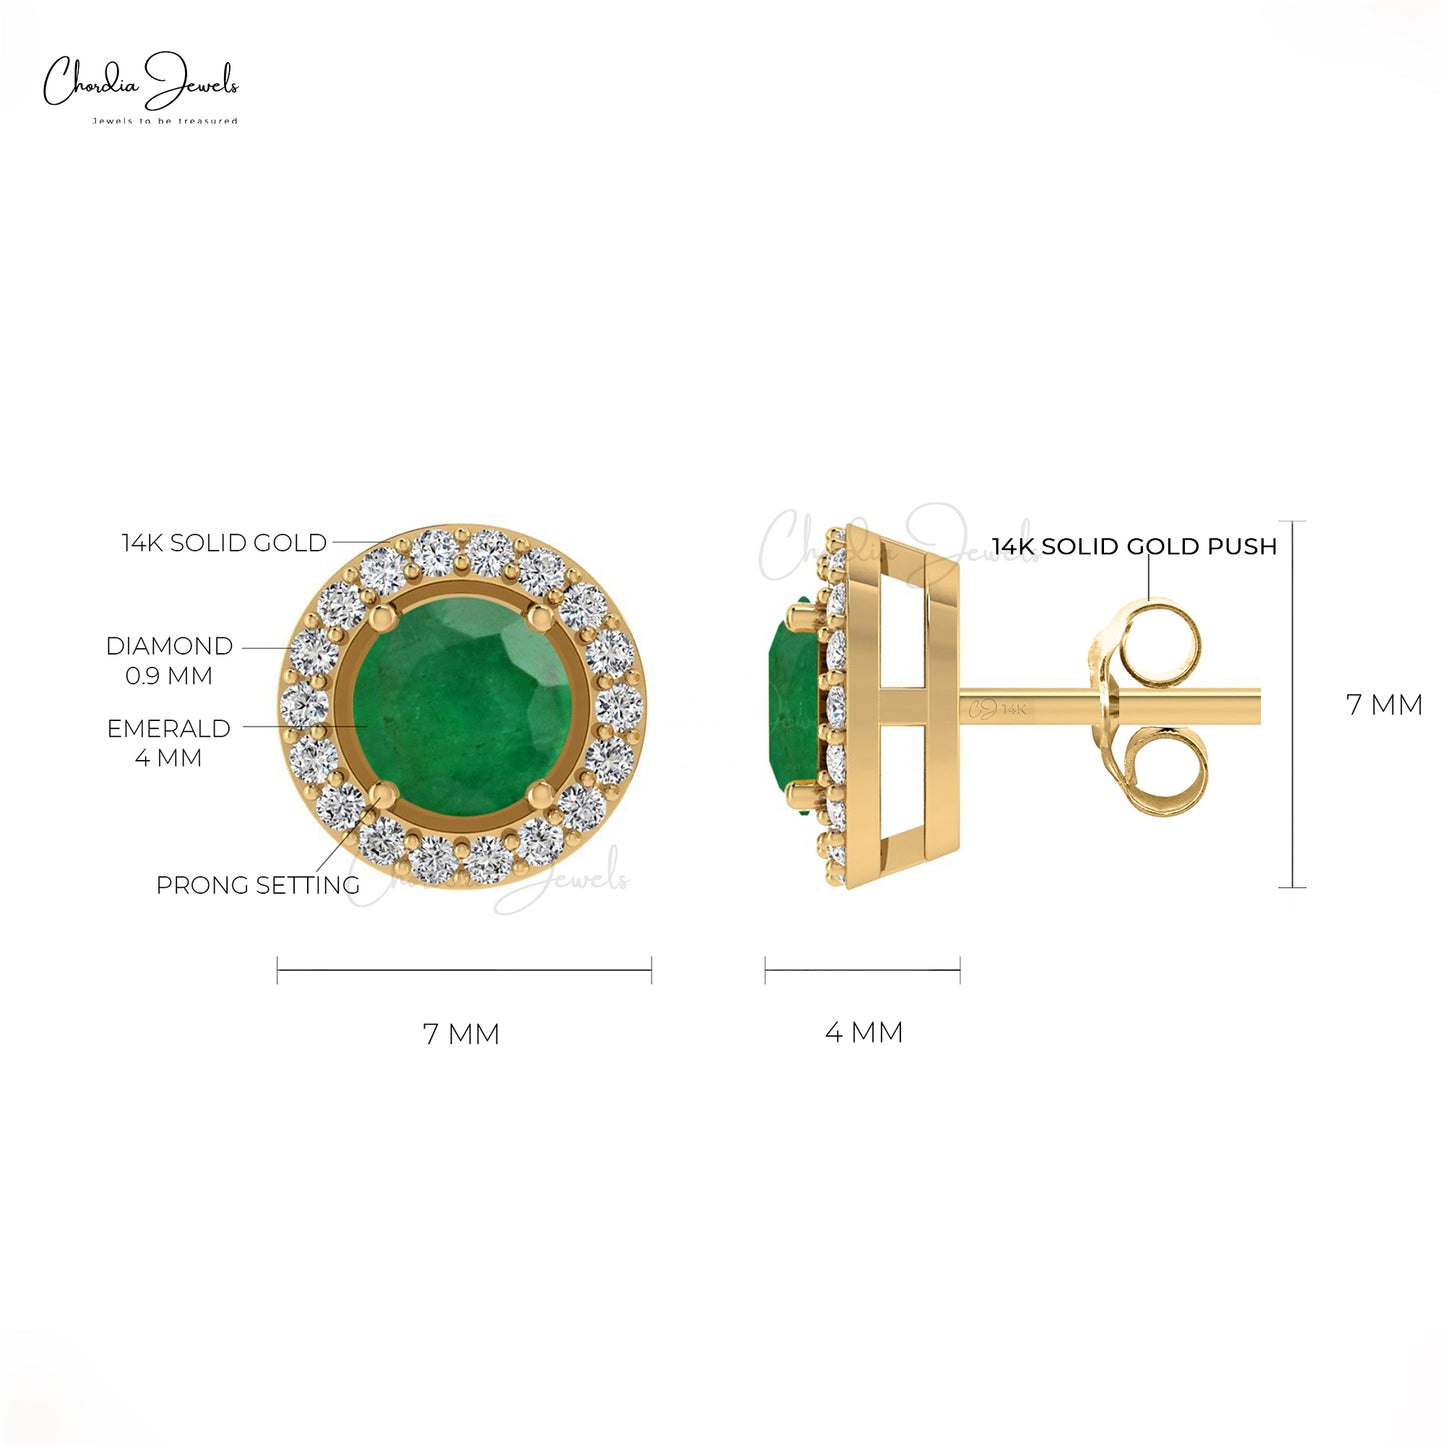 Load image into Gallery viewer, Green Emerald May Birthstone Halo Earrings 14k Real Gold White Diamond Earrings 4mm Round Cut Natural Gemstone Elegant Jewelry
